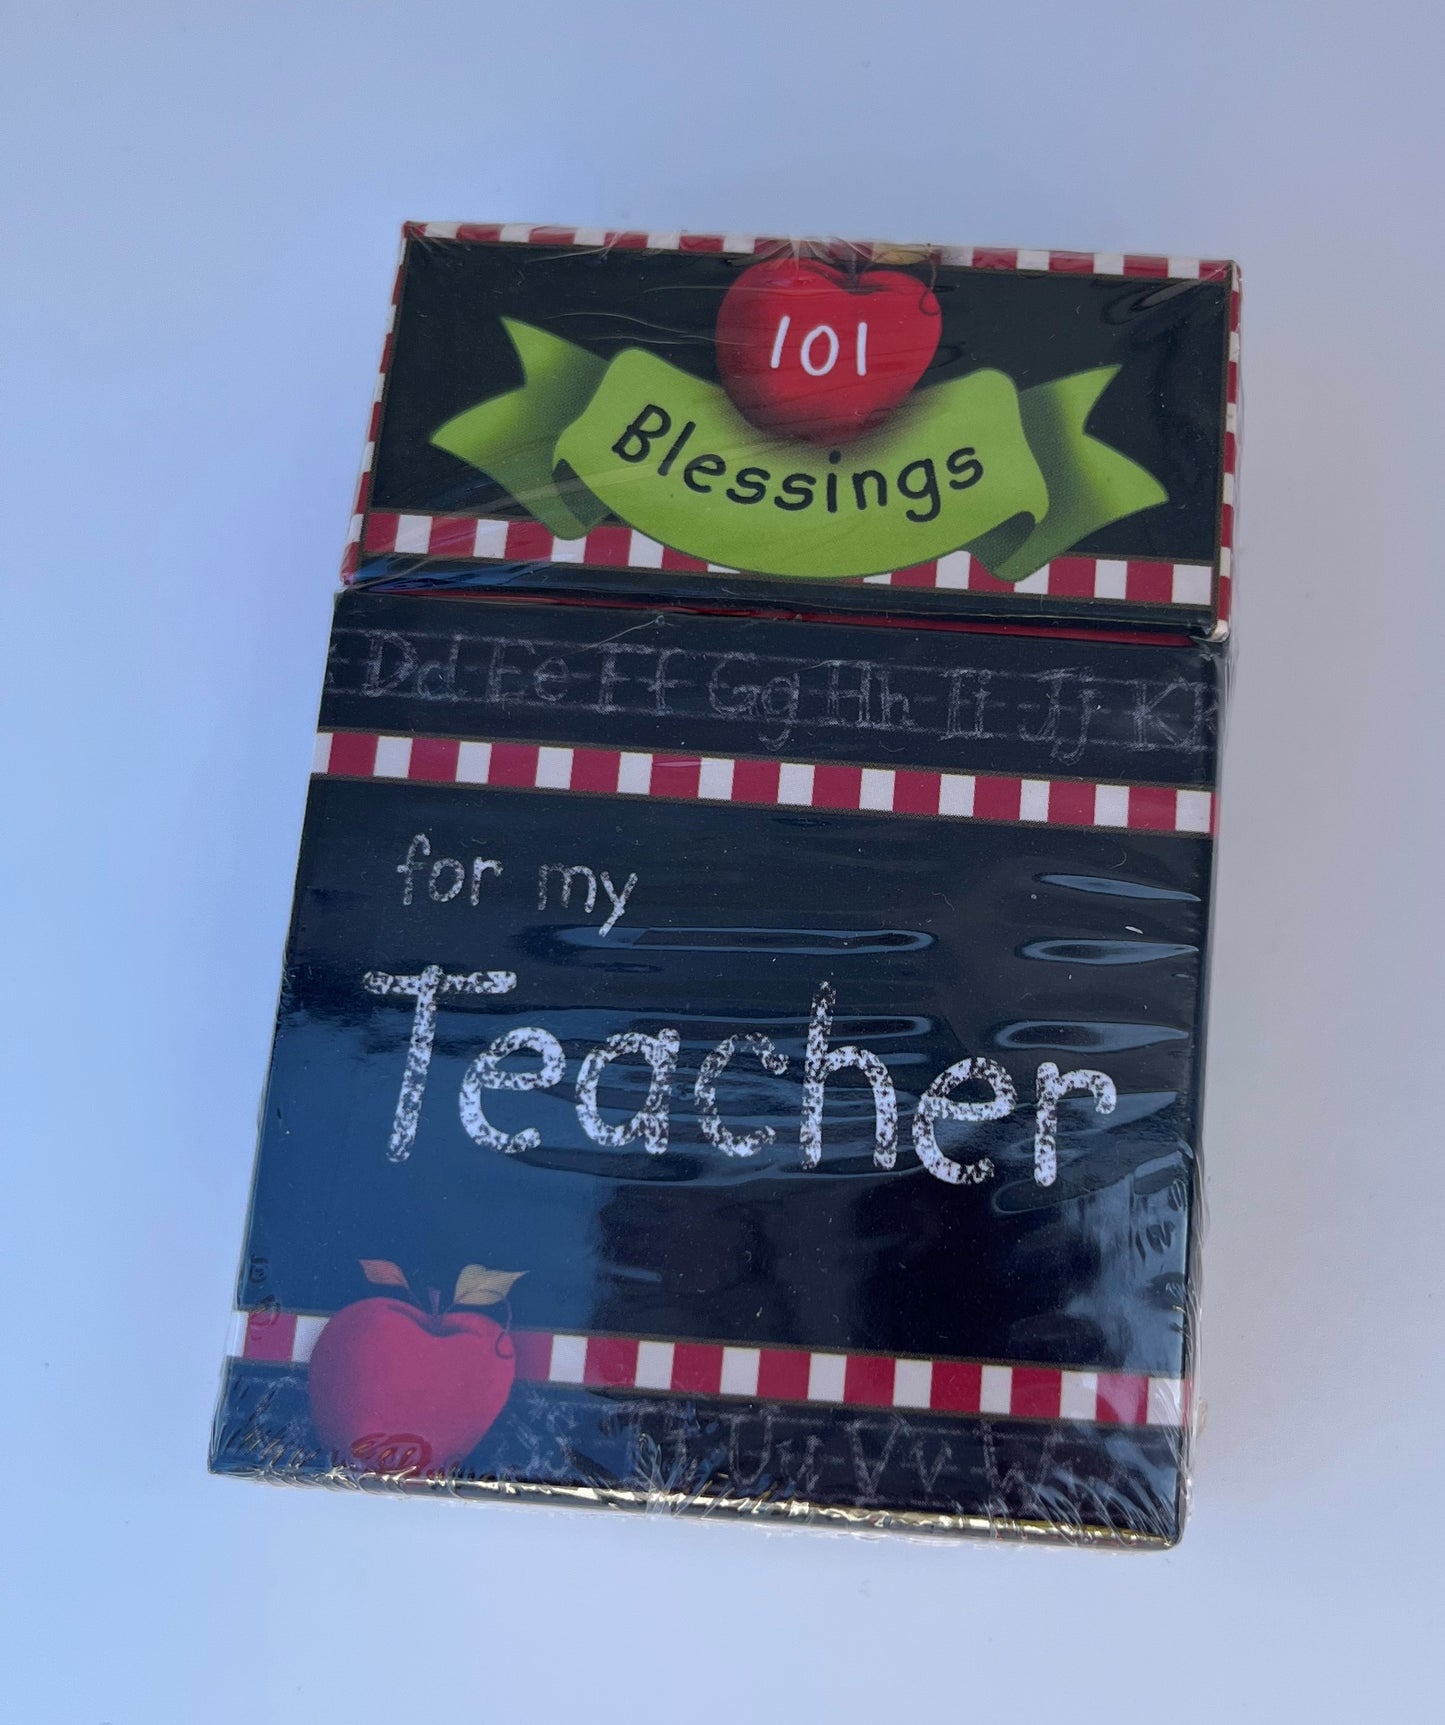 Teacher Thank You Gift - Reusable Bag & 101 Blessings and Messages Cards